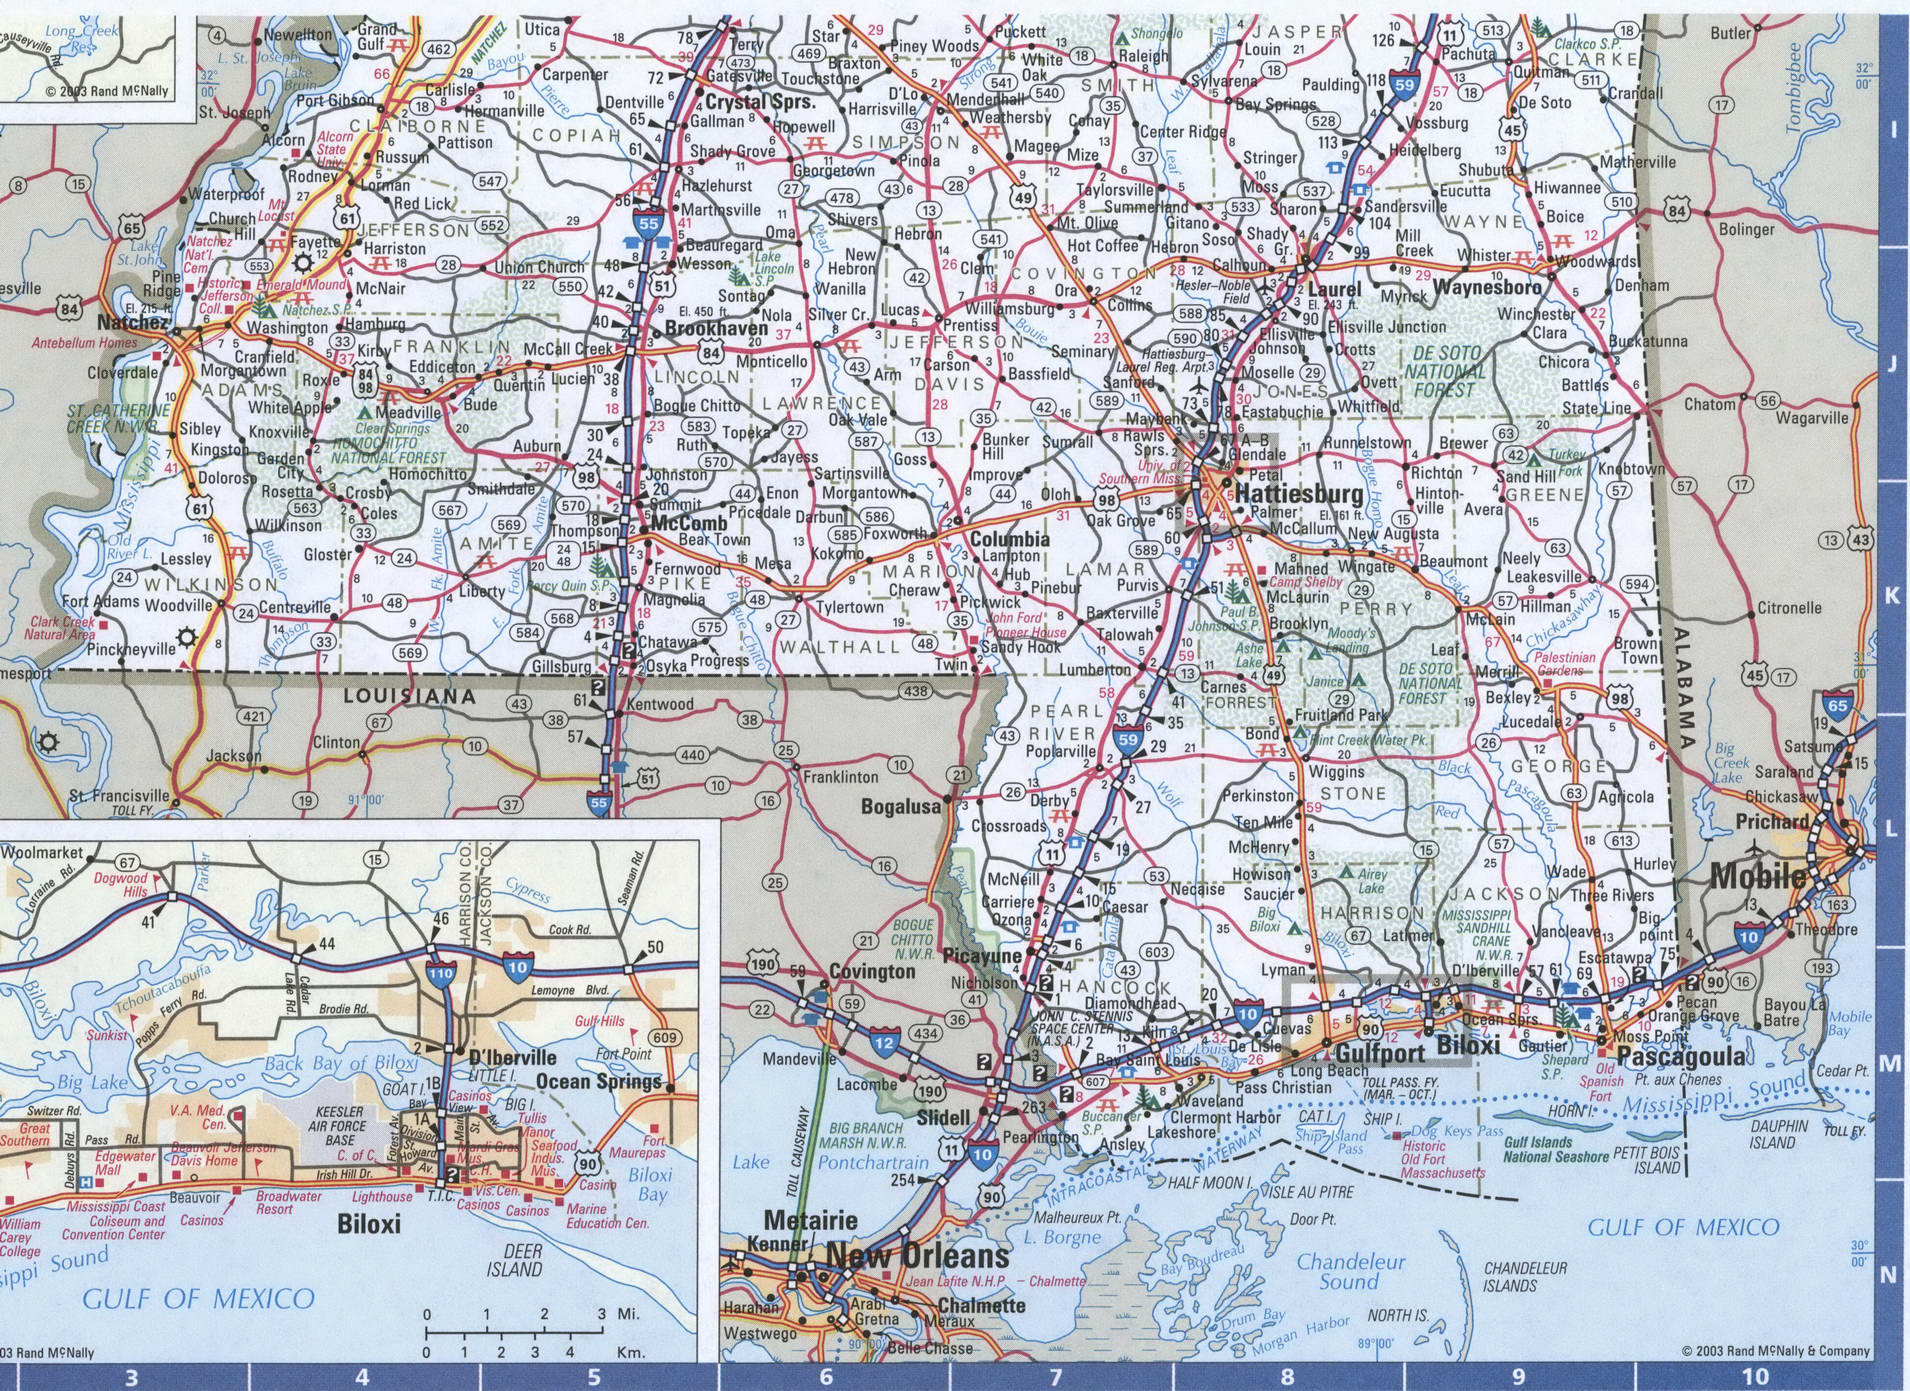 South Mississippi map